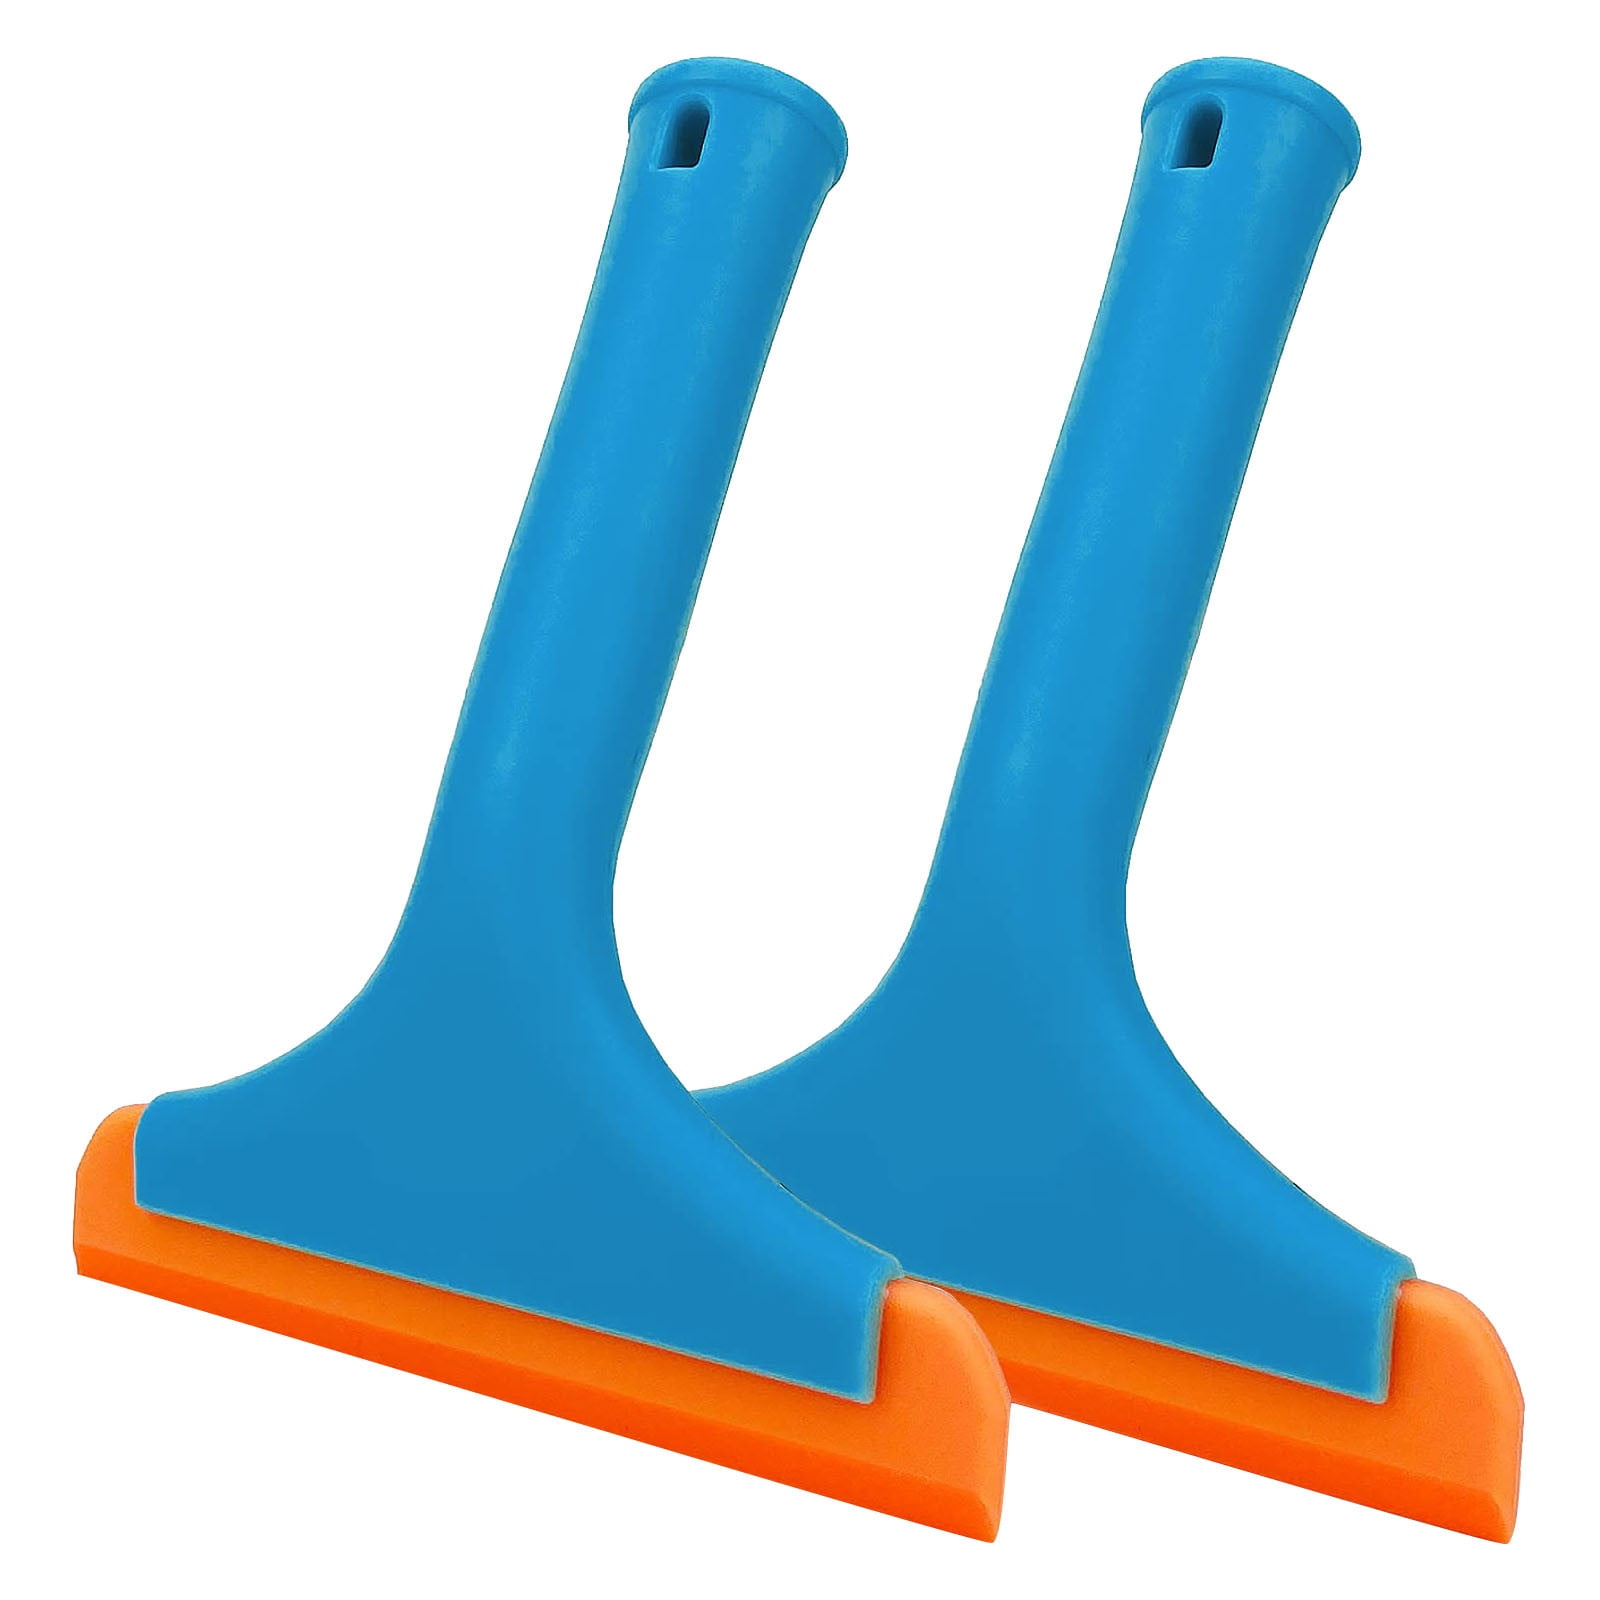 3 Pack Small Squeegee,Kitchen Sink Squeegee and Countertop Mini Silicone  Squeegee,Suitable for Window, Mirror, Bathroom Glass Shower Mirror.